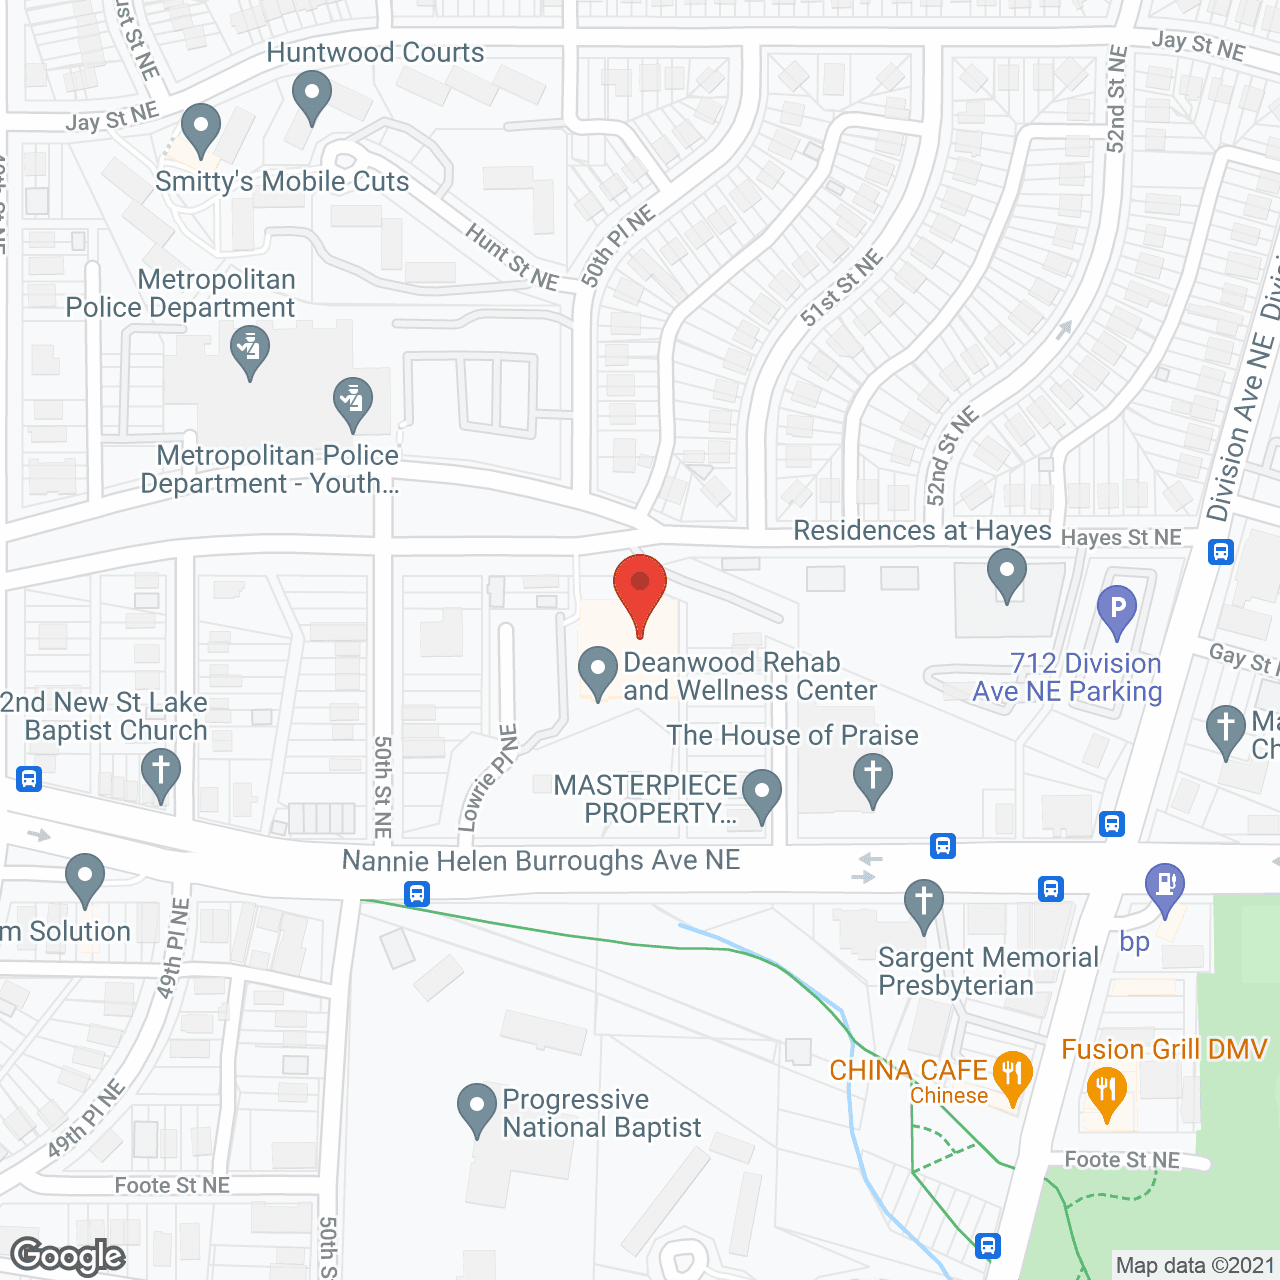 Deanwood Rehab and Wellness Center in google map